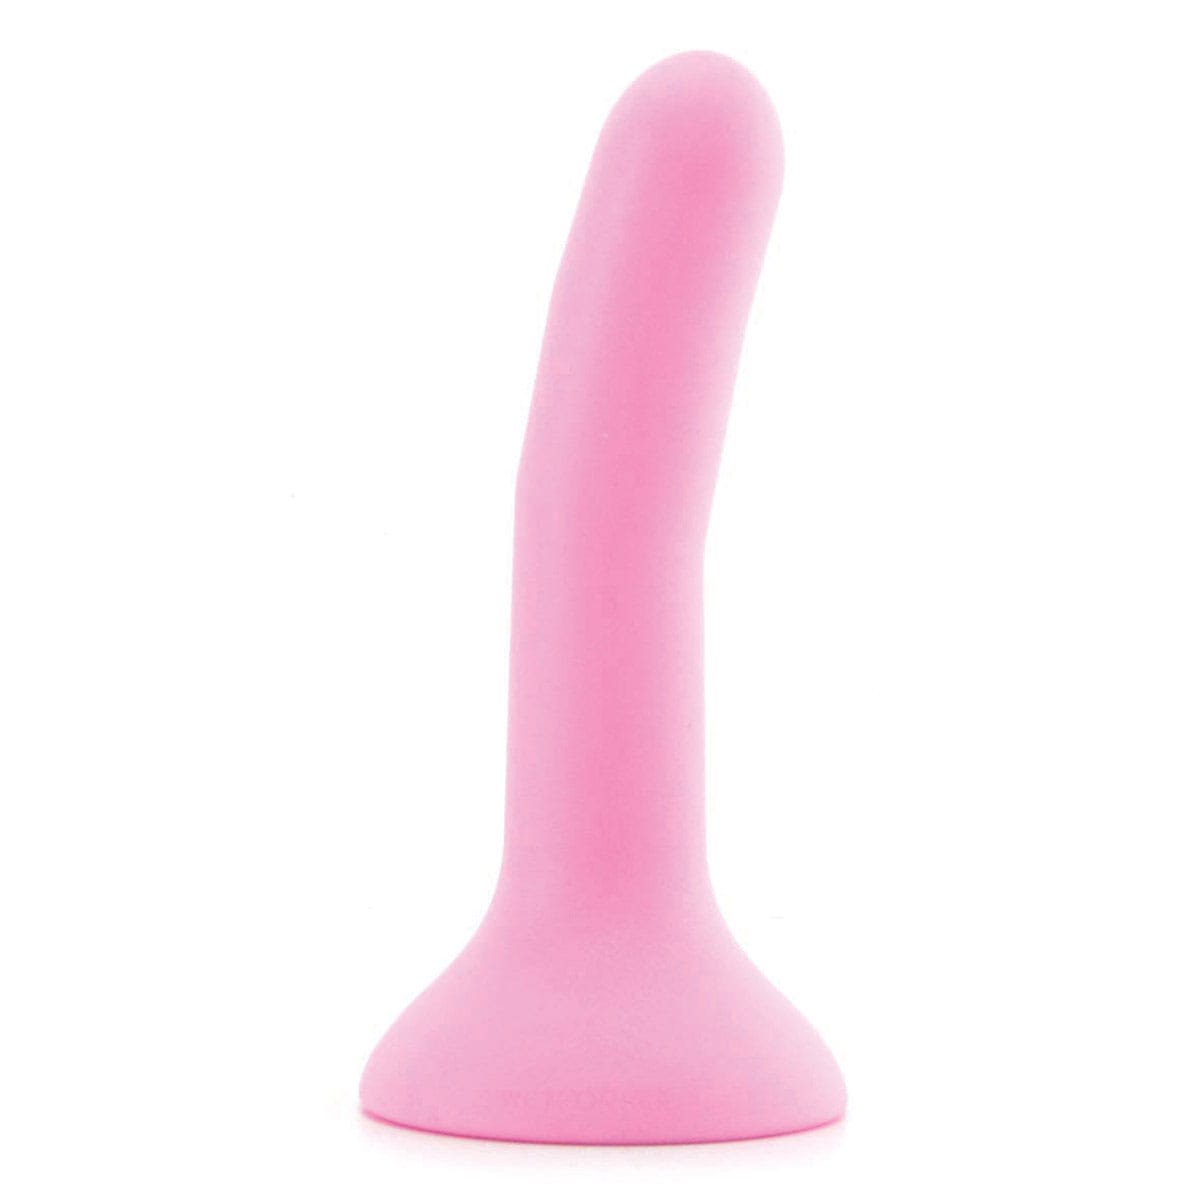 Buy Wet for Her Five Jules   Small   Rose 6 long and  thick dildo made by Wet For Her.